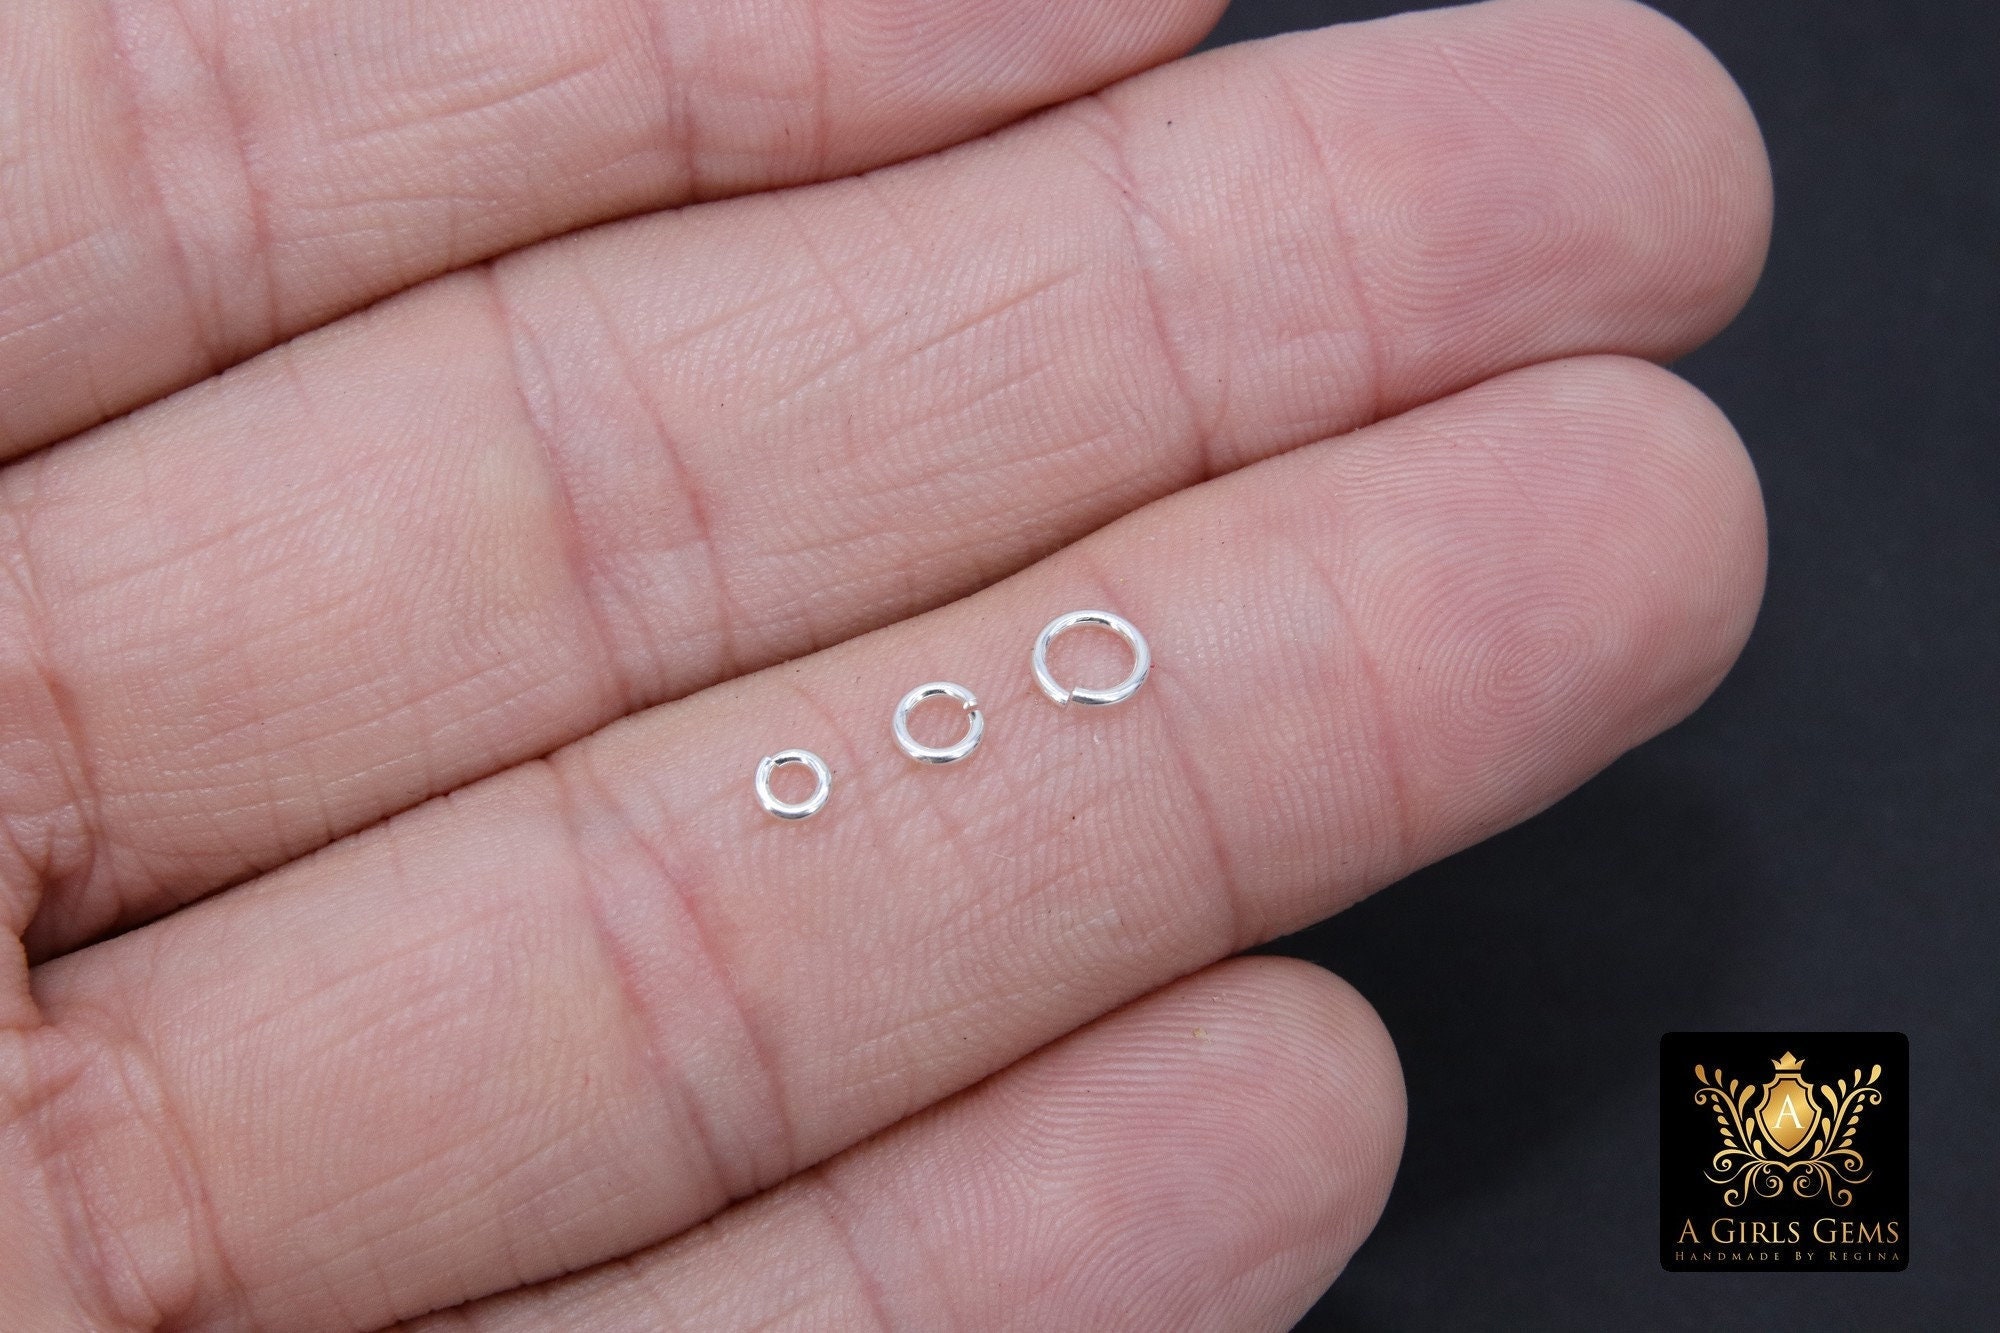 60pcs 925 Sterling Silver Jump Rings, 4mm 5mm 6mm Assorted Size